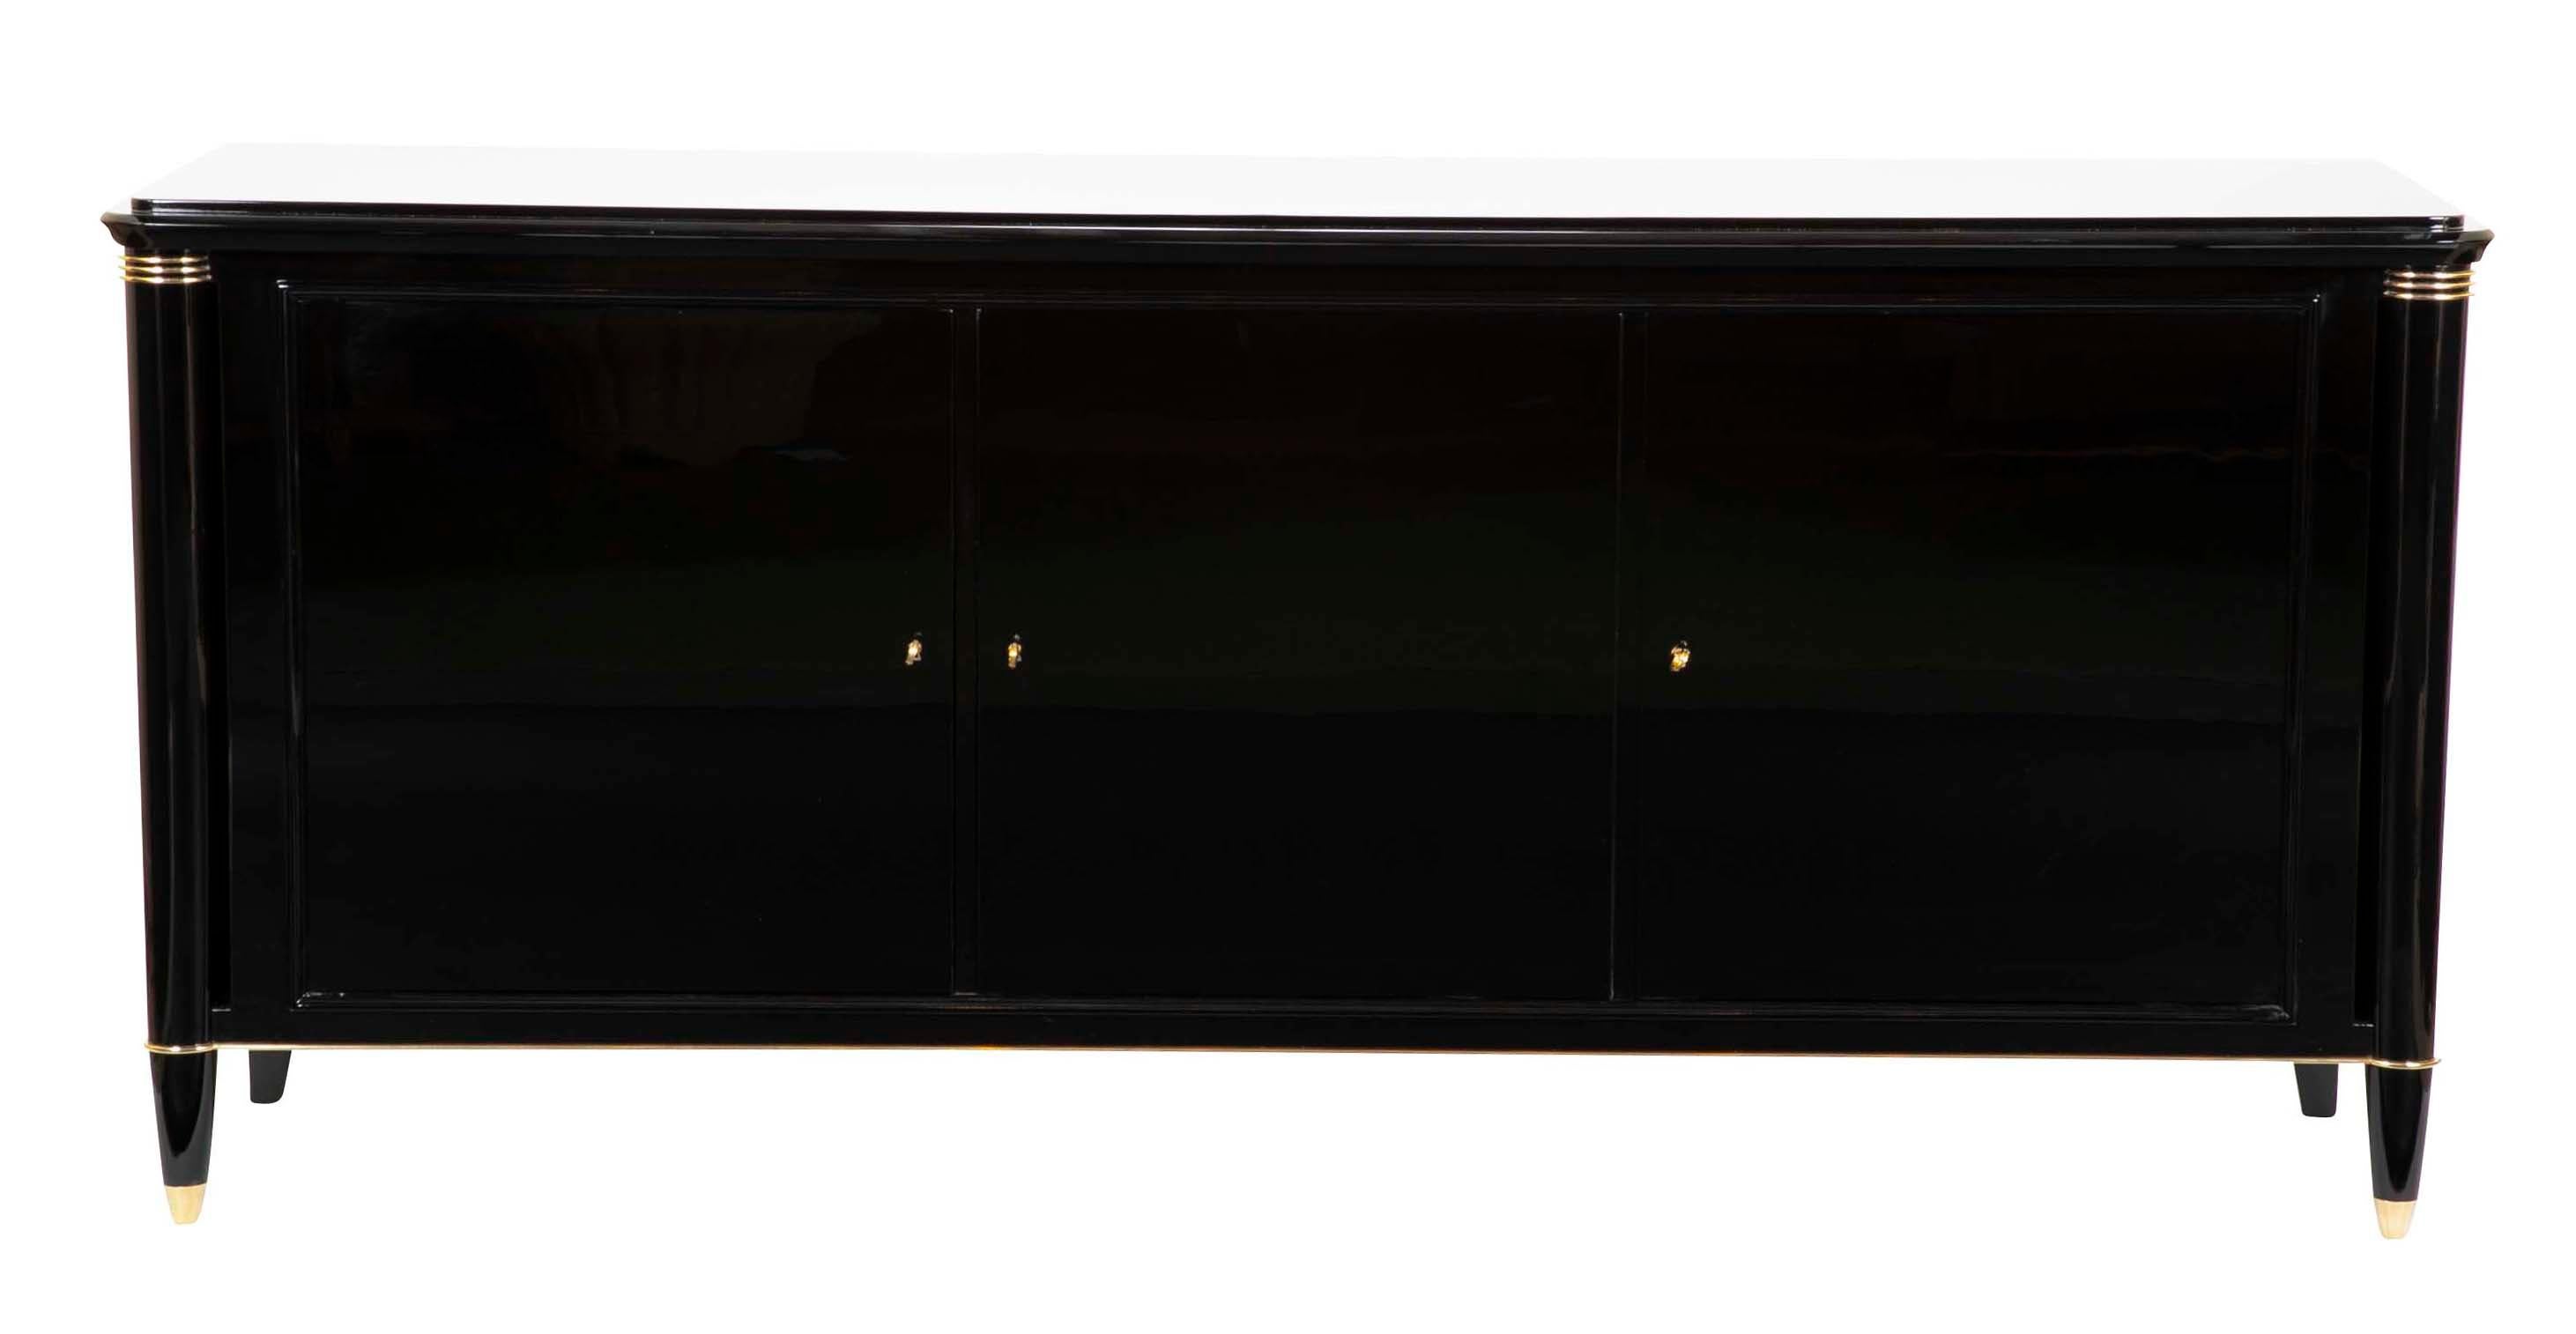 This credenza was designed by Batistin Spade and was suplied to the estate from which we purchased it by Robert Courturier. It retains its tag, 